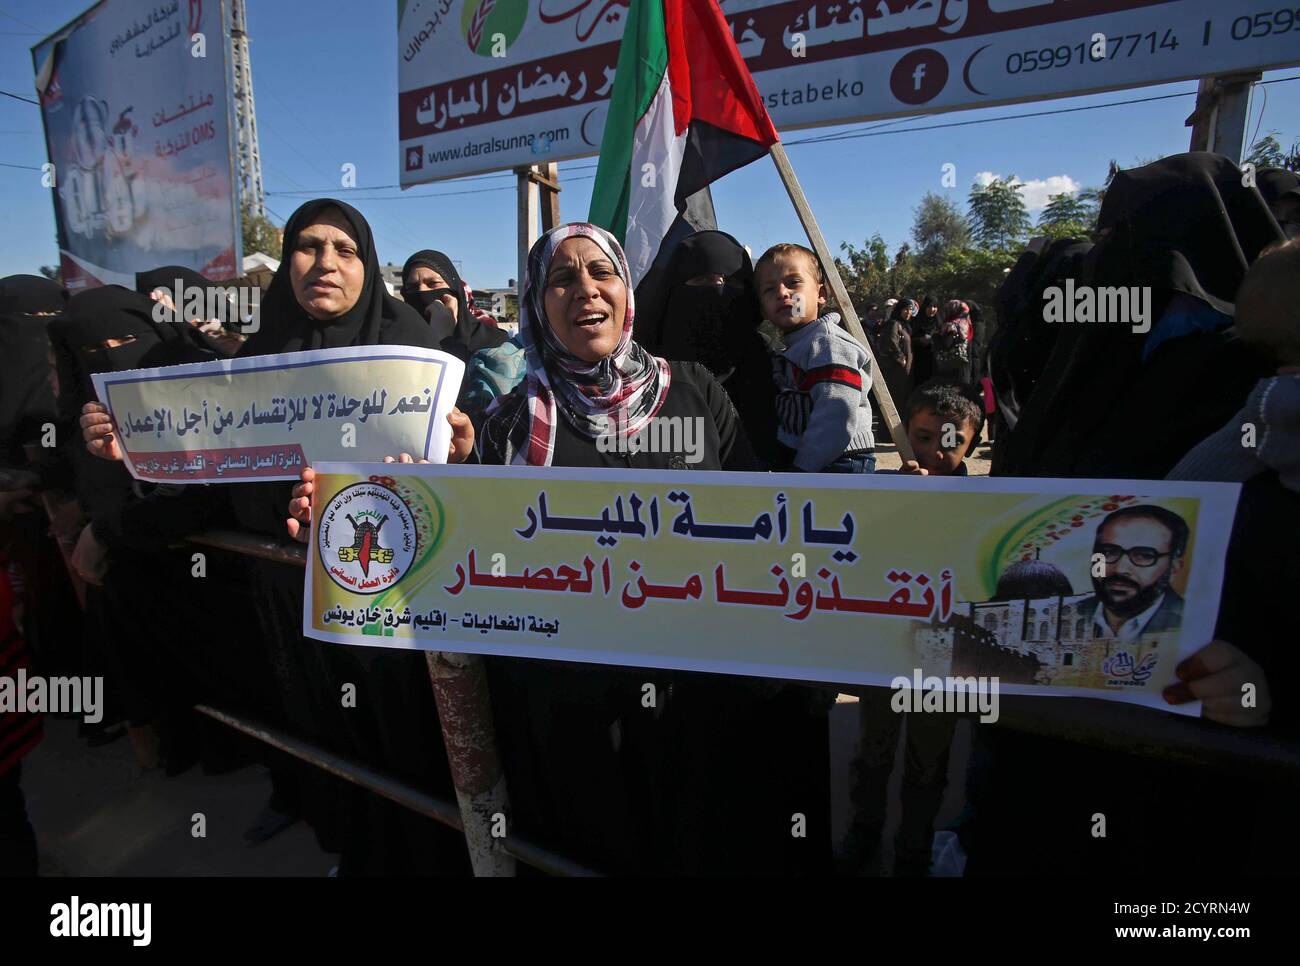 Palestinians protest against the blockade and call for reconstructing Gaza, in Khan Younis in the southern Gaza Strip December 28, 2014. The sign (R) reads, 'Oh, nation of a billion, rescue us from the blockade.' REUTERS/Ibraheem Abu Mustafa (GAZA - Tags: POLITICS SOCIETY IMMIGRATION) Stock Photo